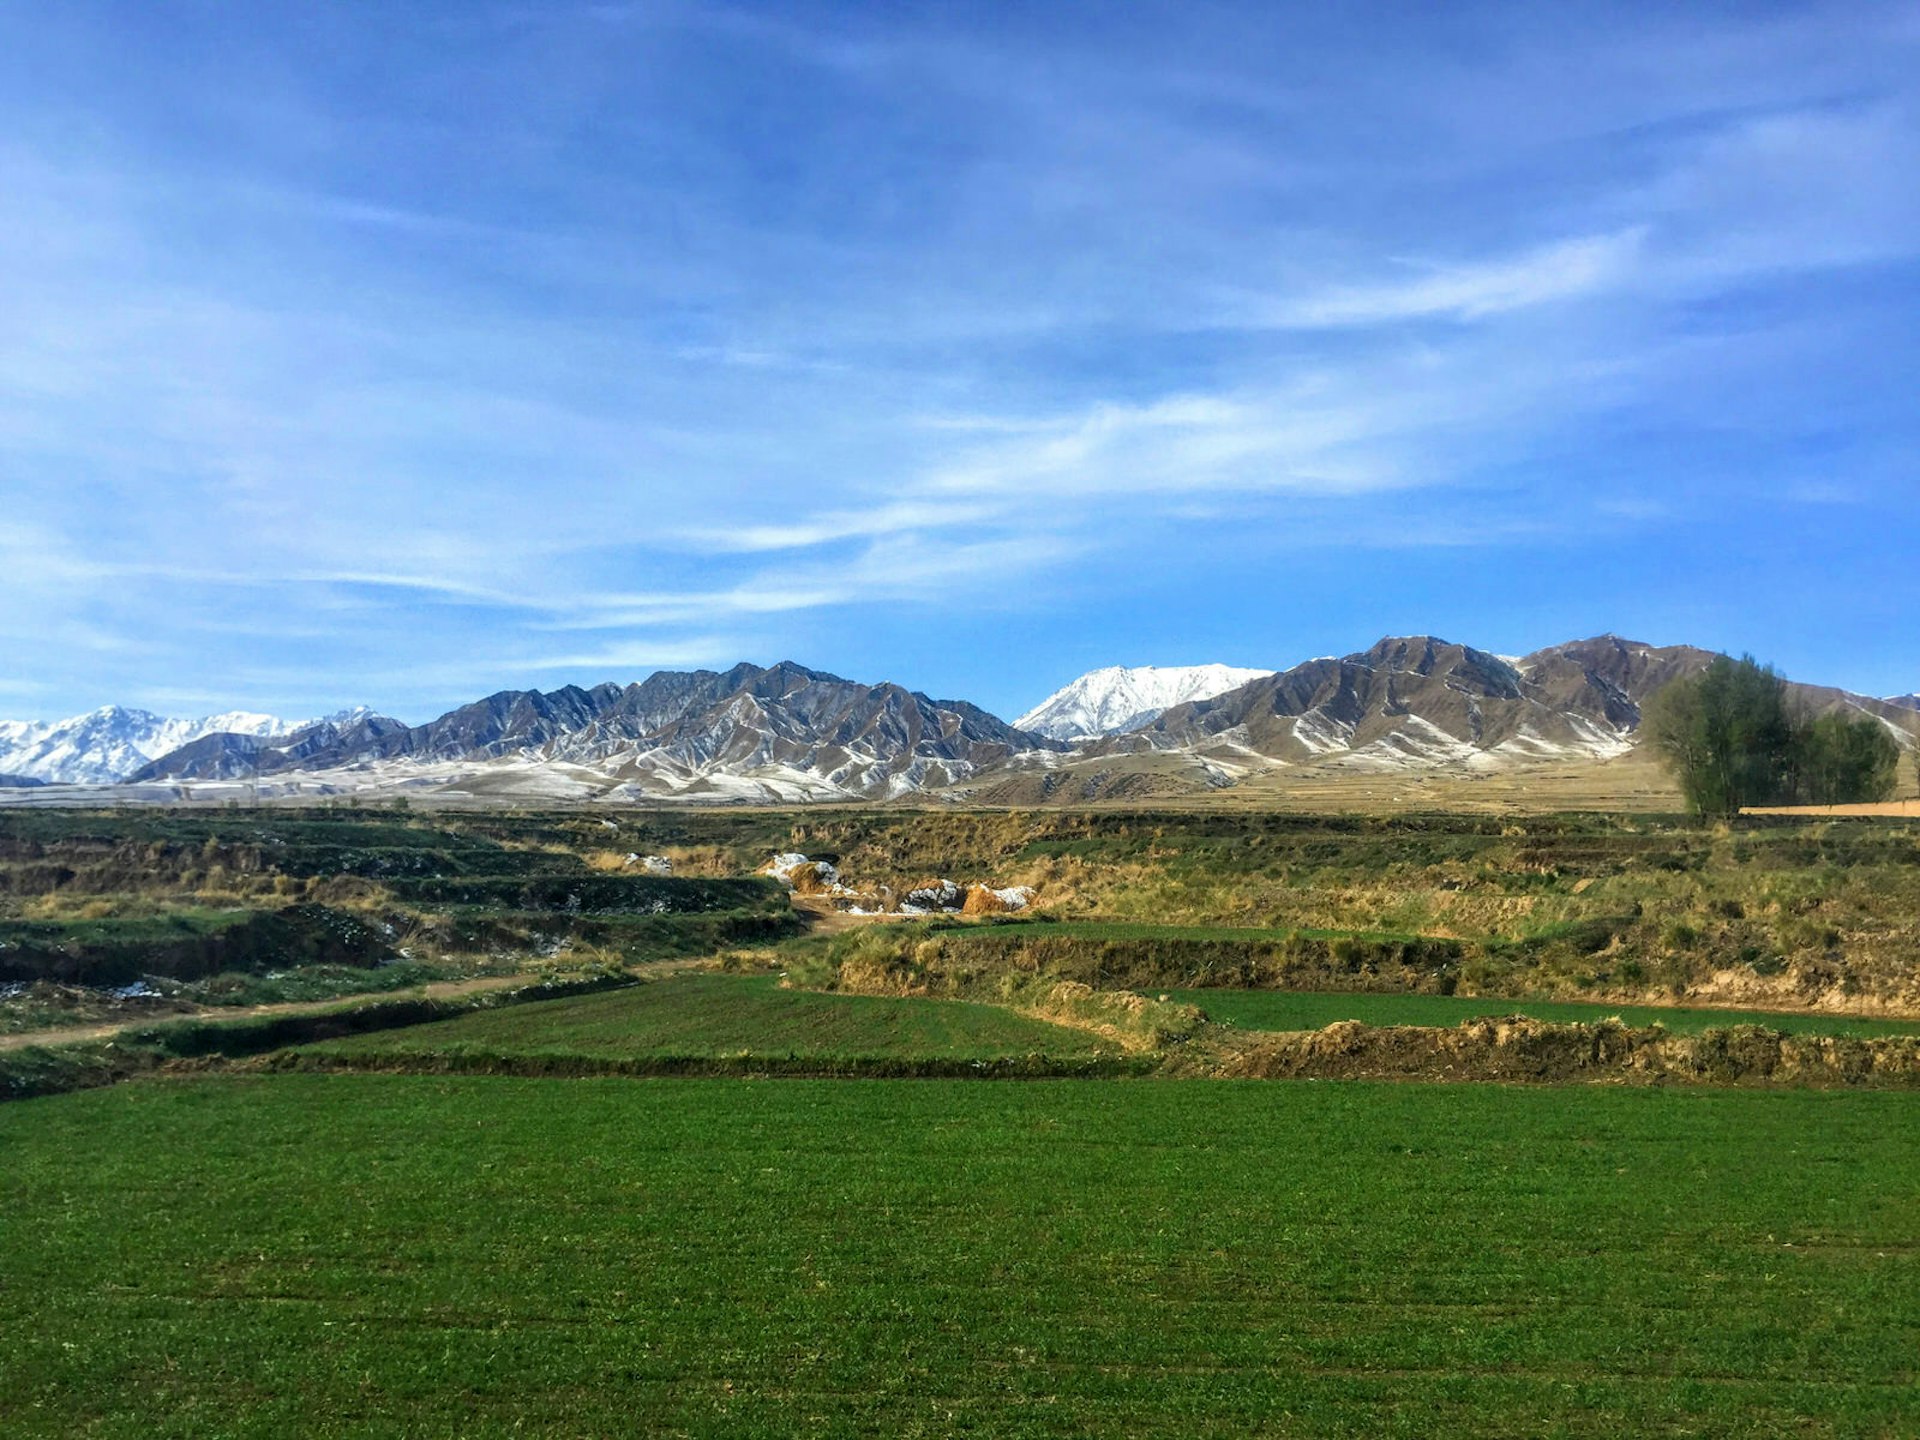 Qilian Mountains dusted by April snow, on the way to Mati Si © Megan Eaves / Lonely Planet